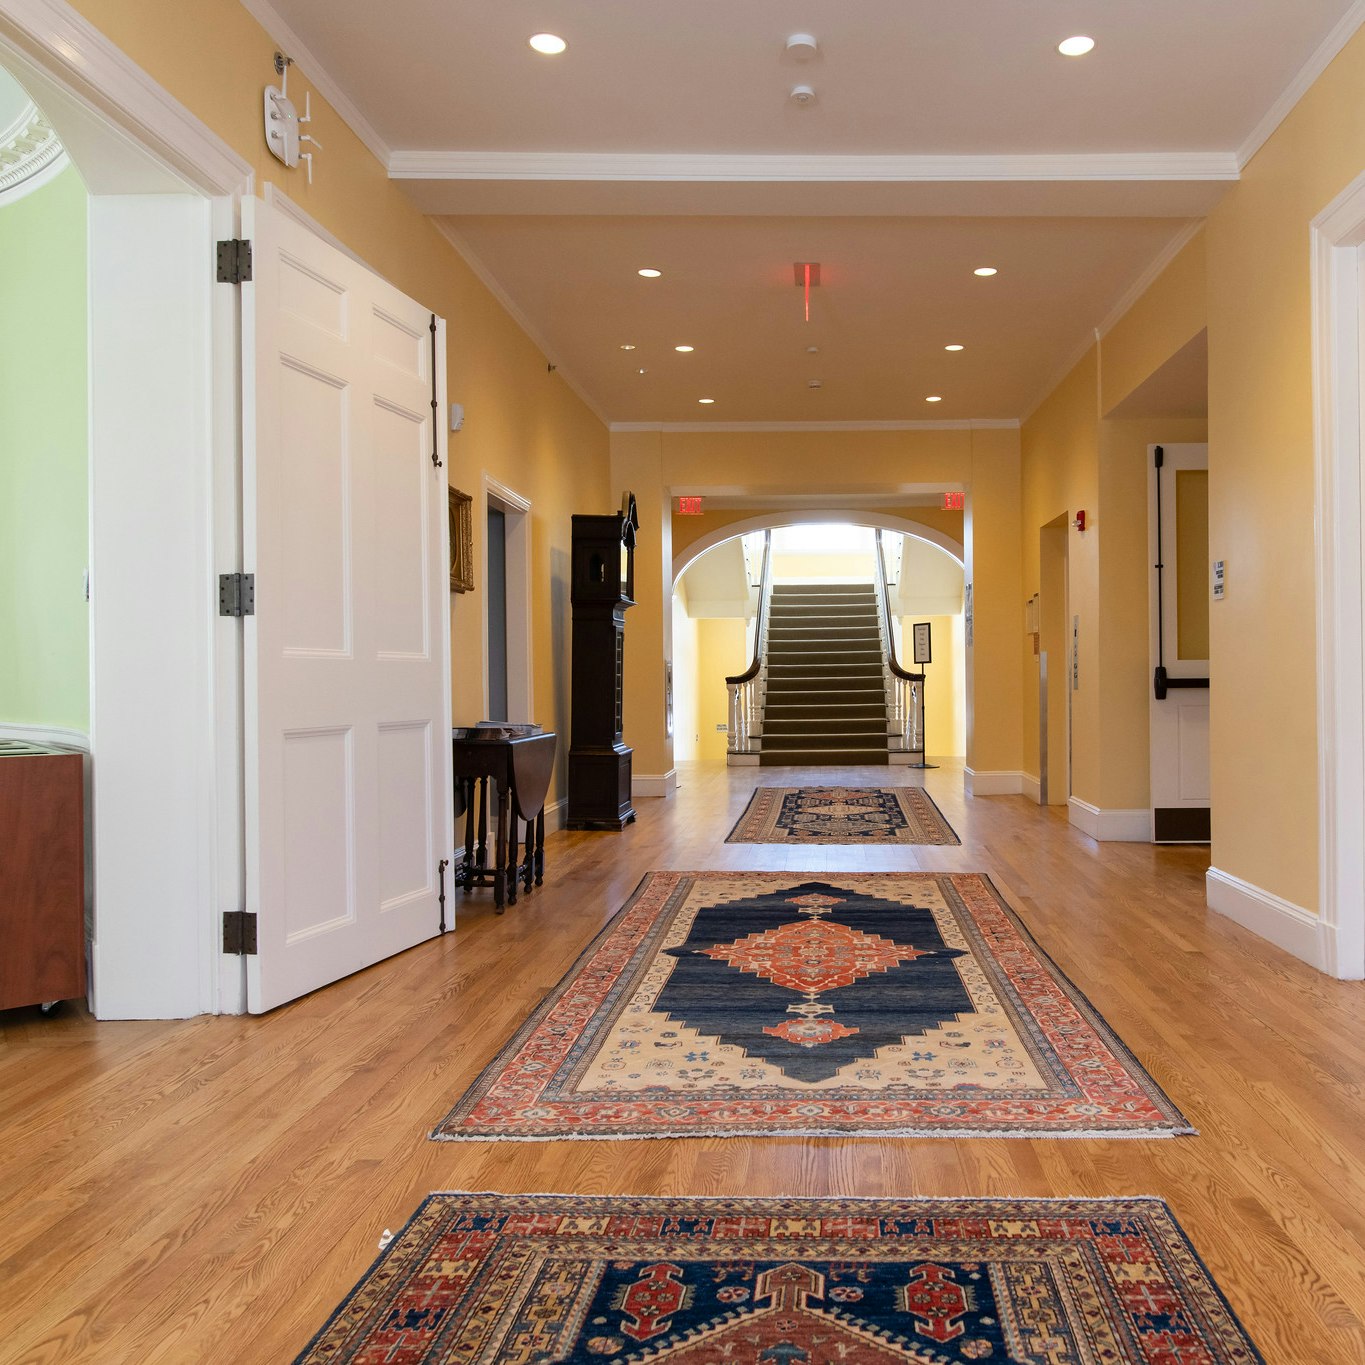 Lobby with wood floors and three printed rugs. At the end of the lobby there is a dark brown staircase leading upstairs.